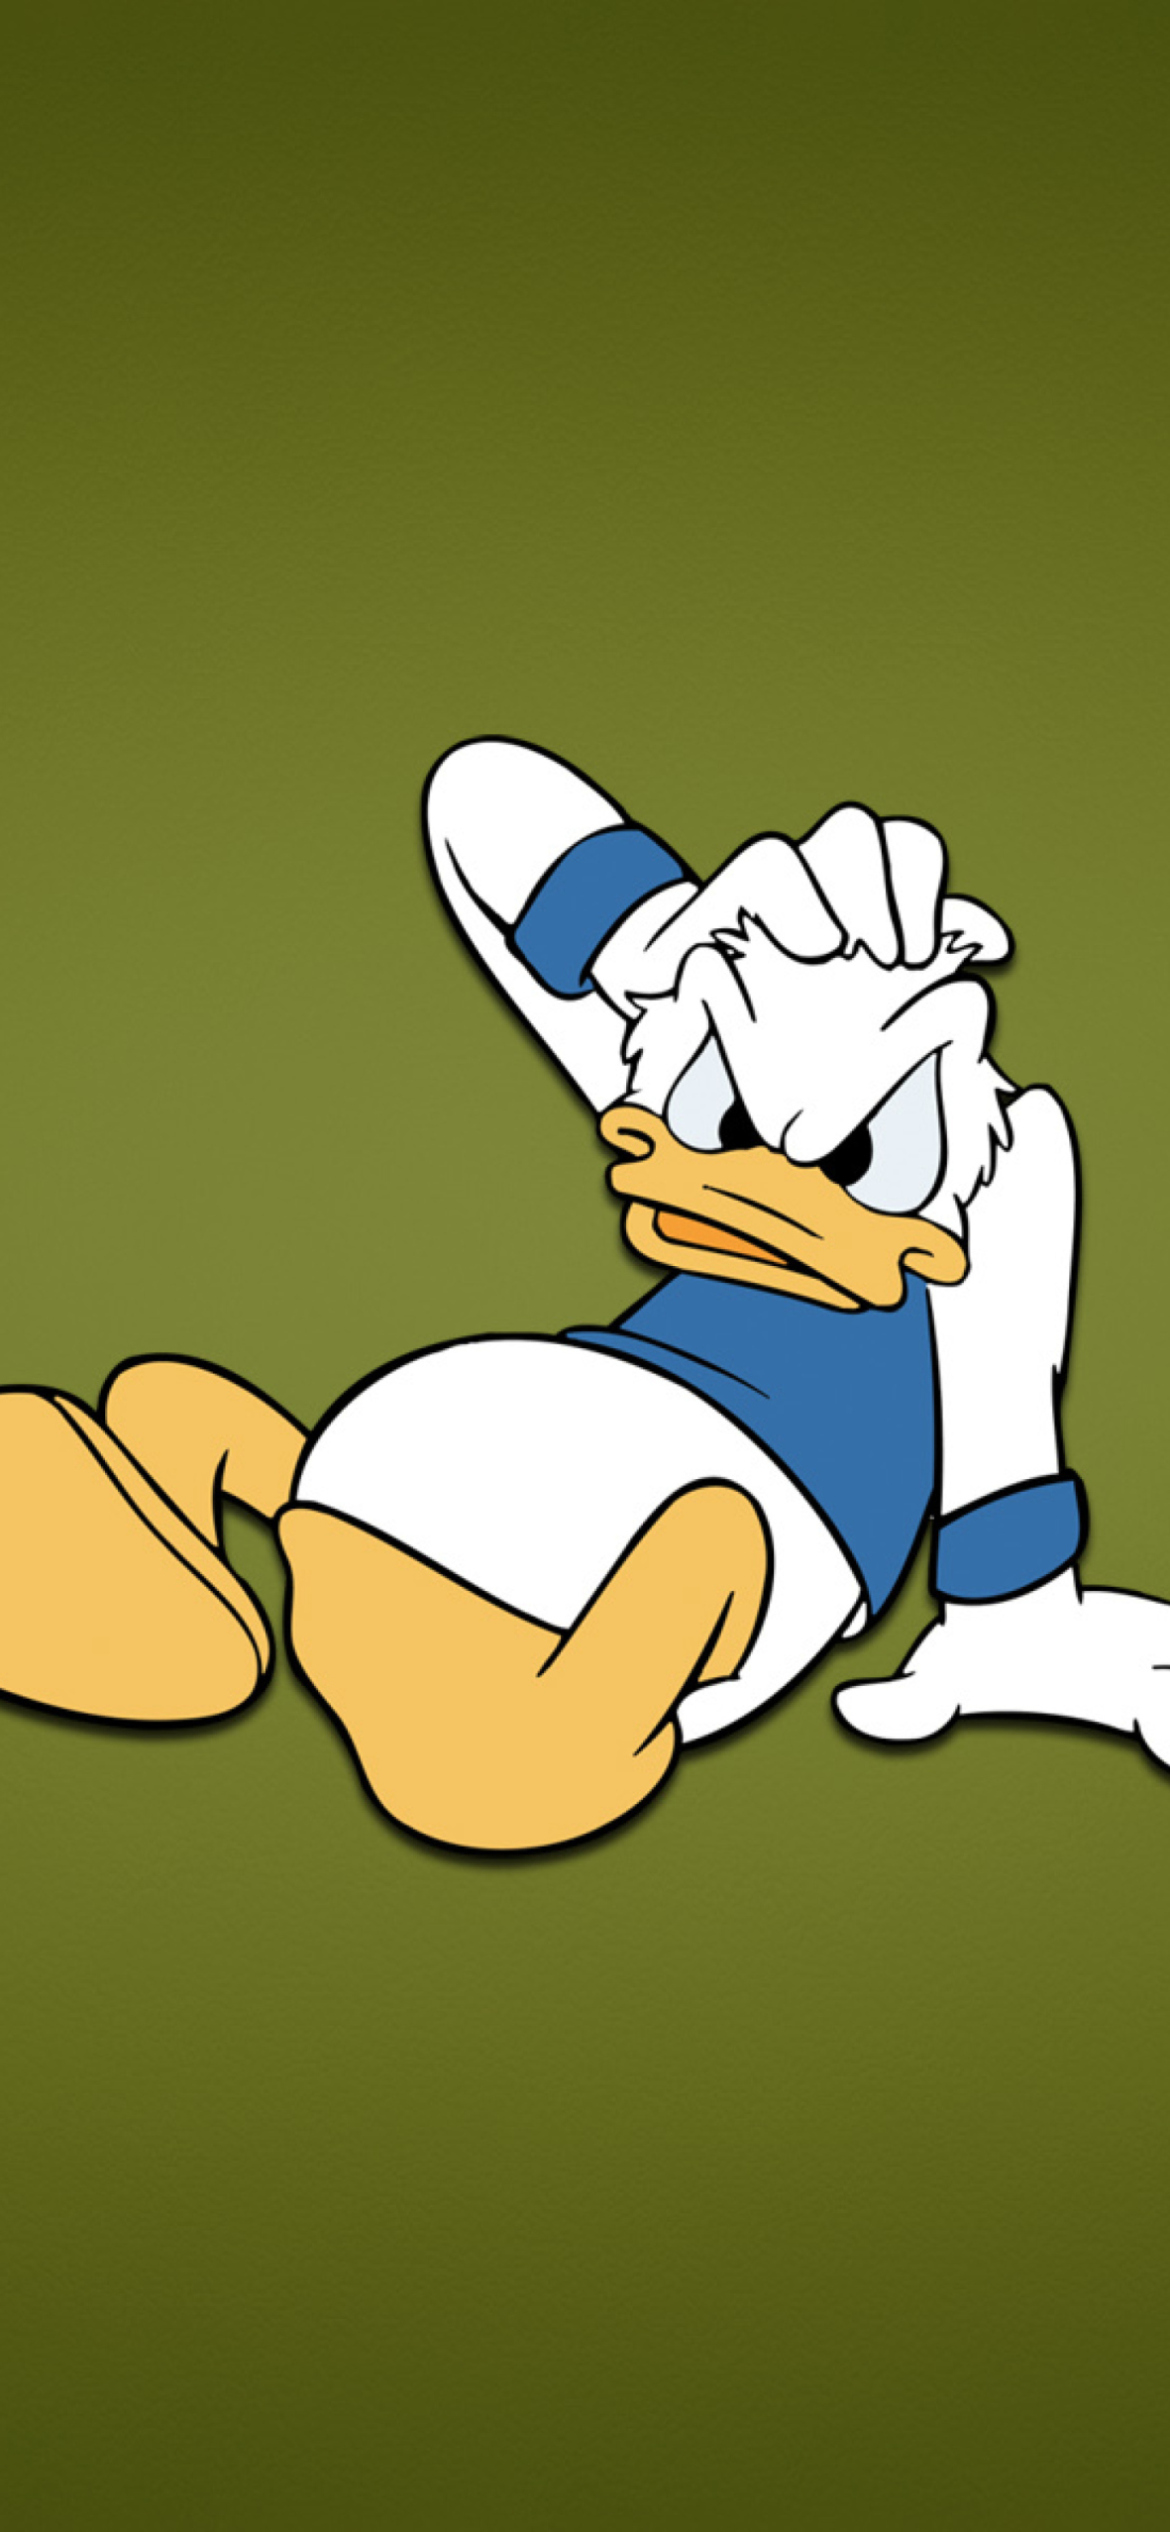 Donald Duck Cartoon Image Driving Car Country Road Desktop Hd Wallpapers  For Mobile Phones And Computer 1920x1200  Wallpapers13com